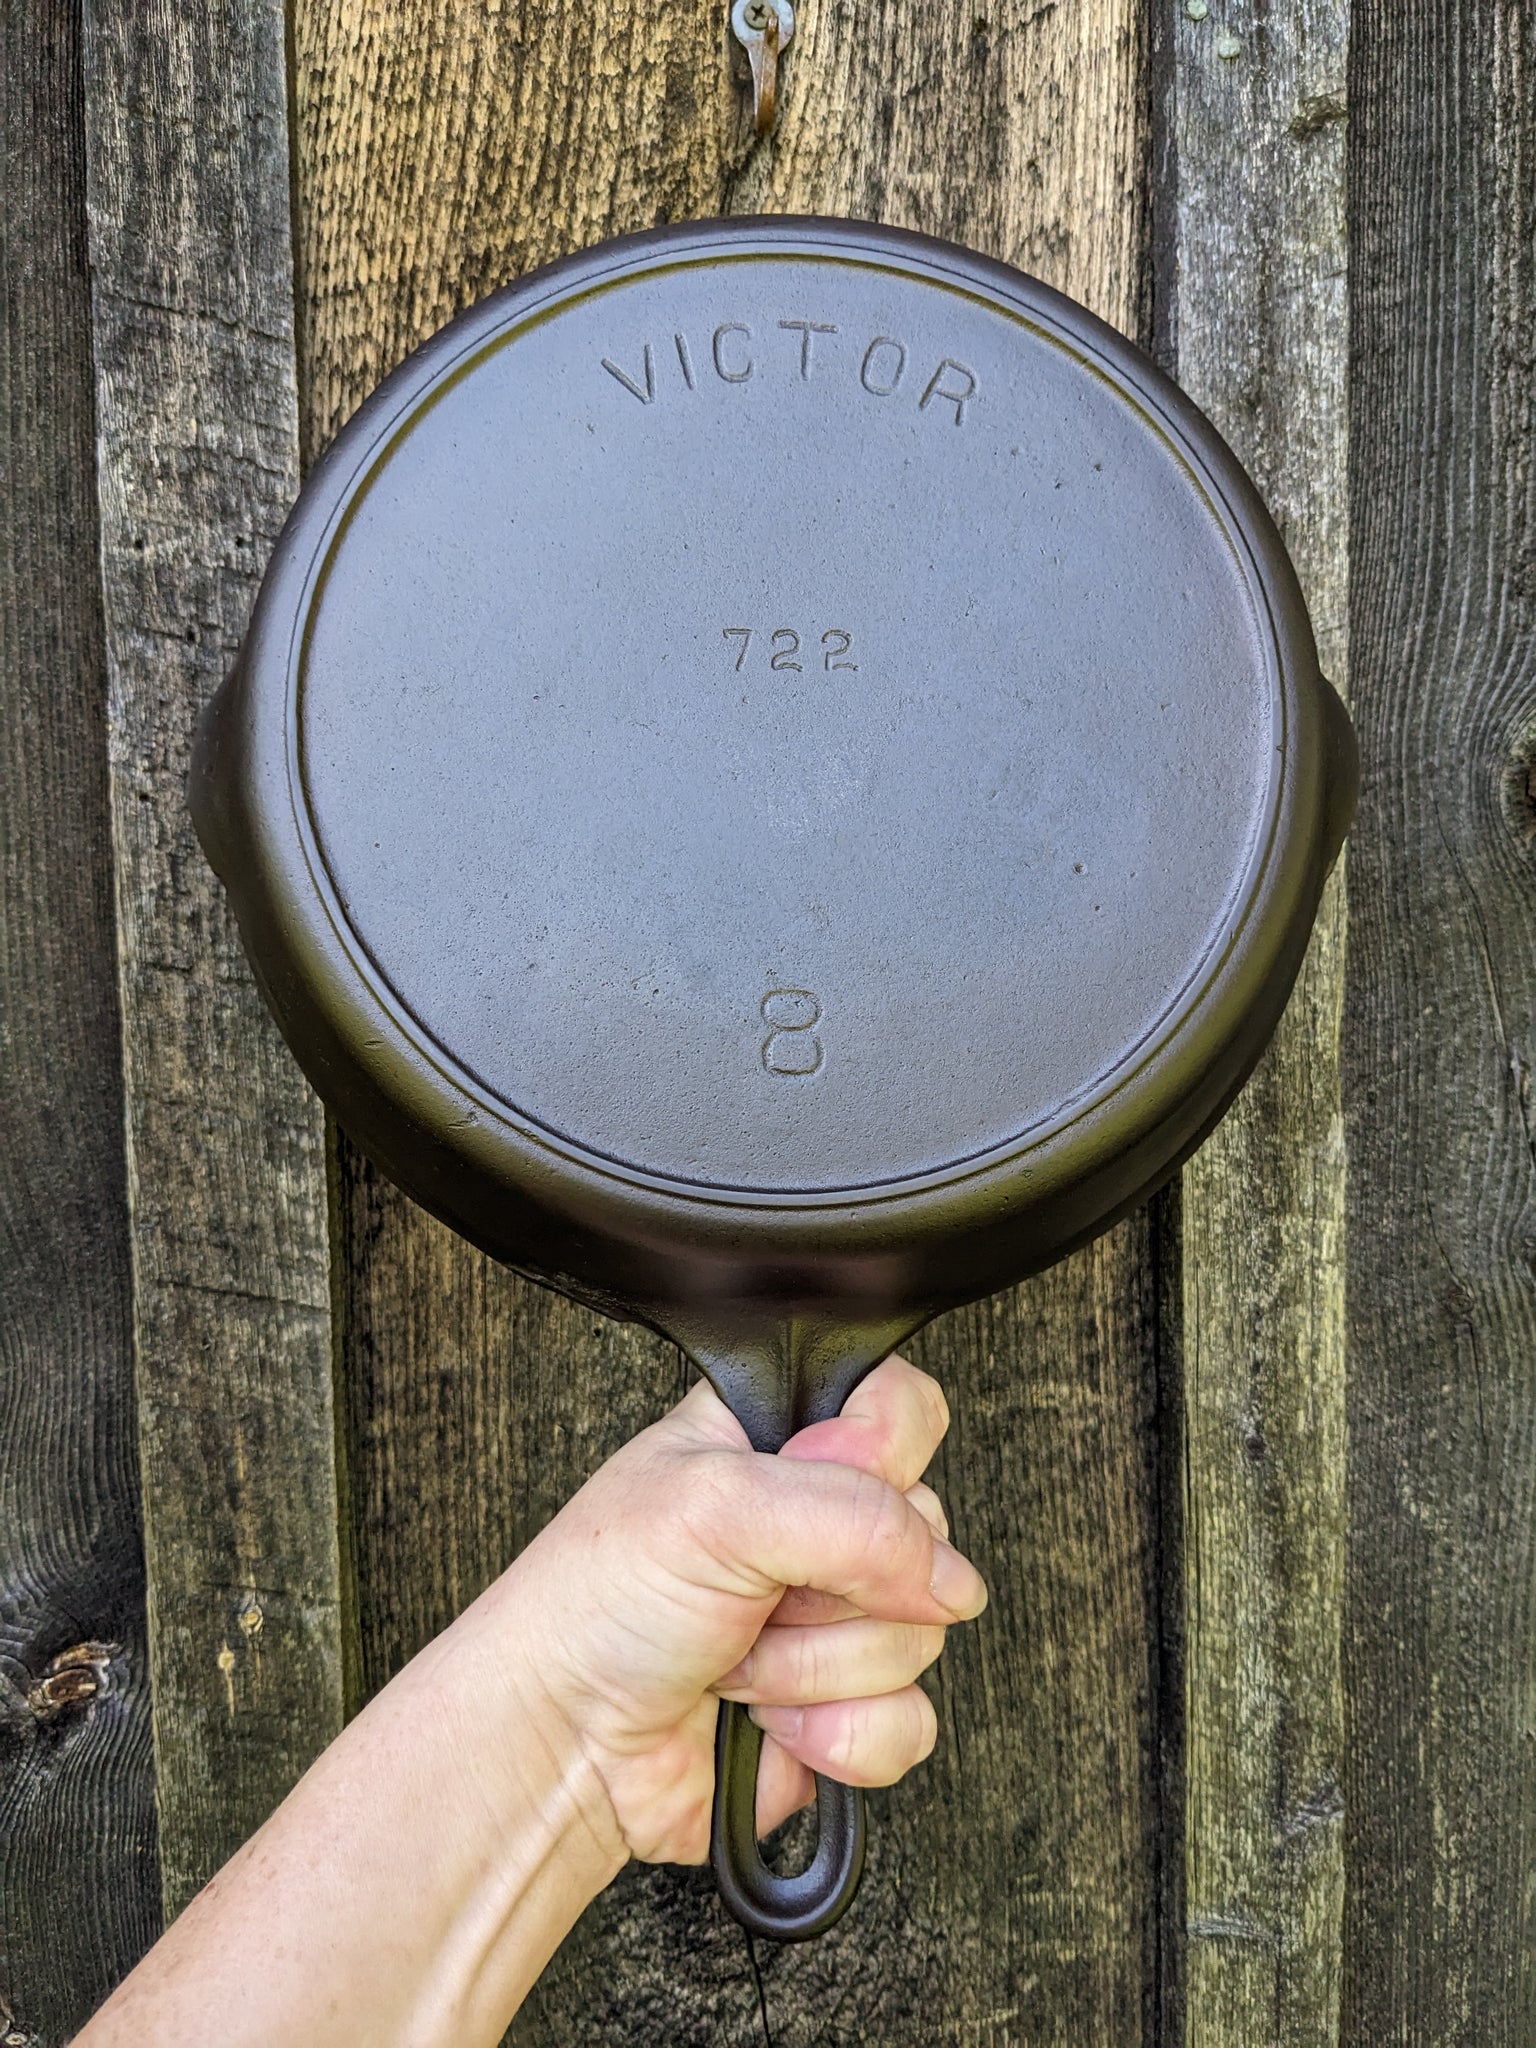 Victor by Griswold #8 Cast Iron Skillet 722 – The Forge at 